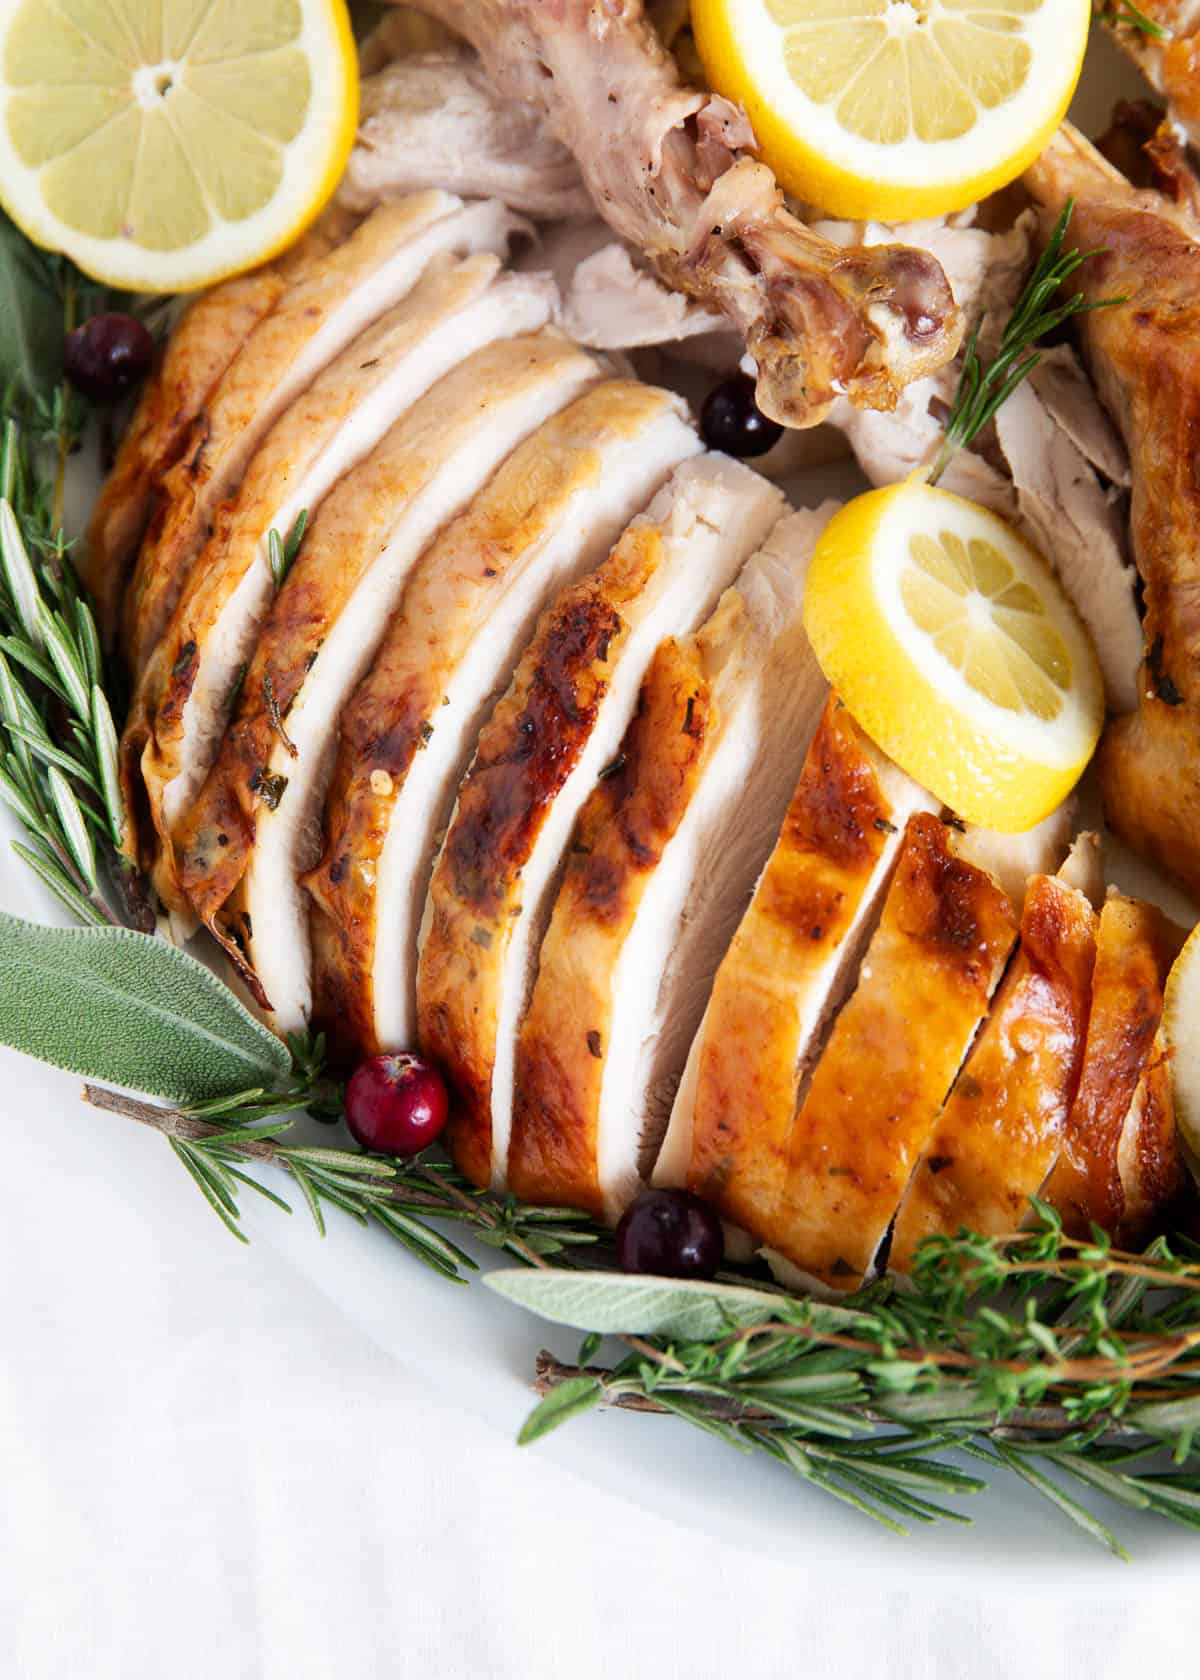 Sliced oven roasted turkey on a white plate with herbs.